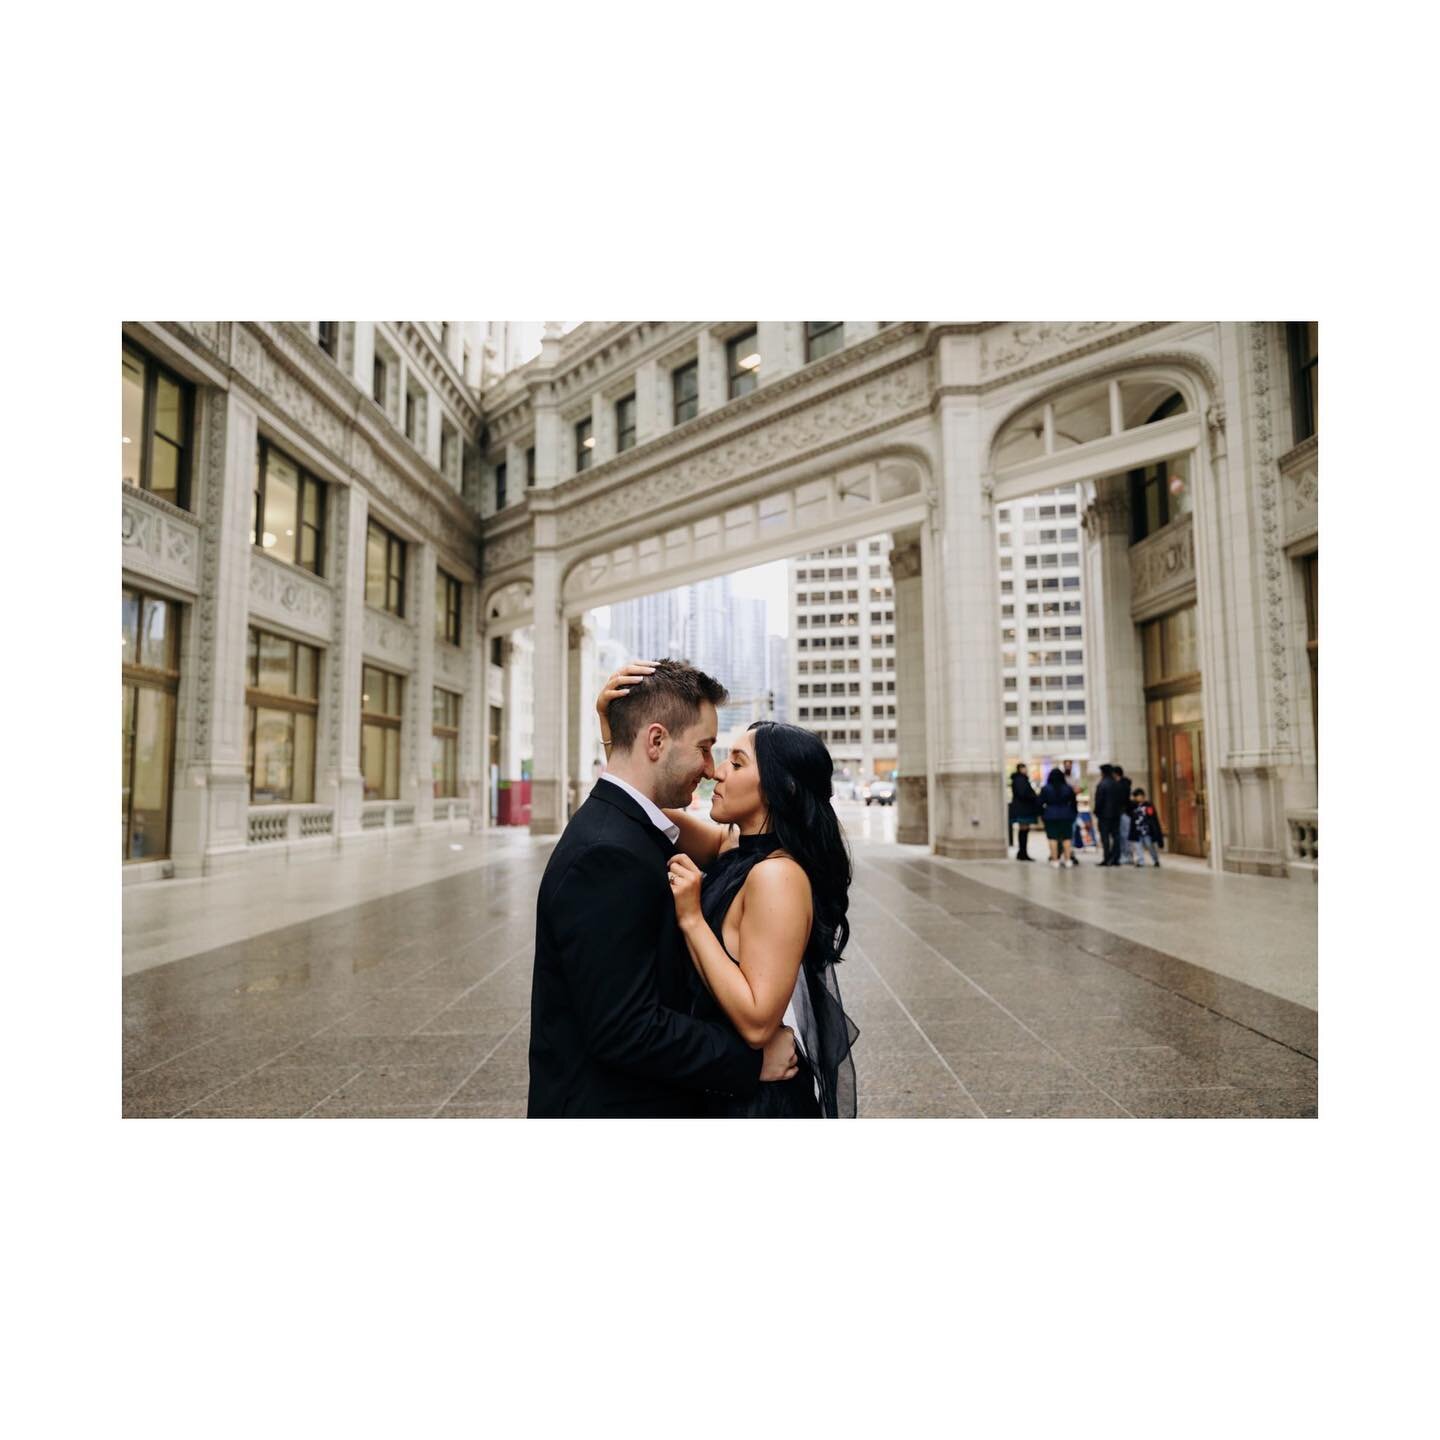 When your engagement session feels like it belongs in an art gallery. 🎨🖌️🖼️

#chicagobride #chicagoengagementsession #chicagoengagementlocations